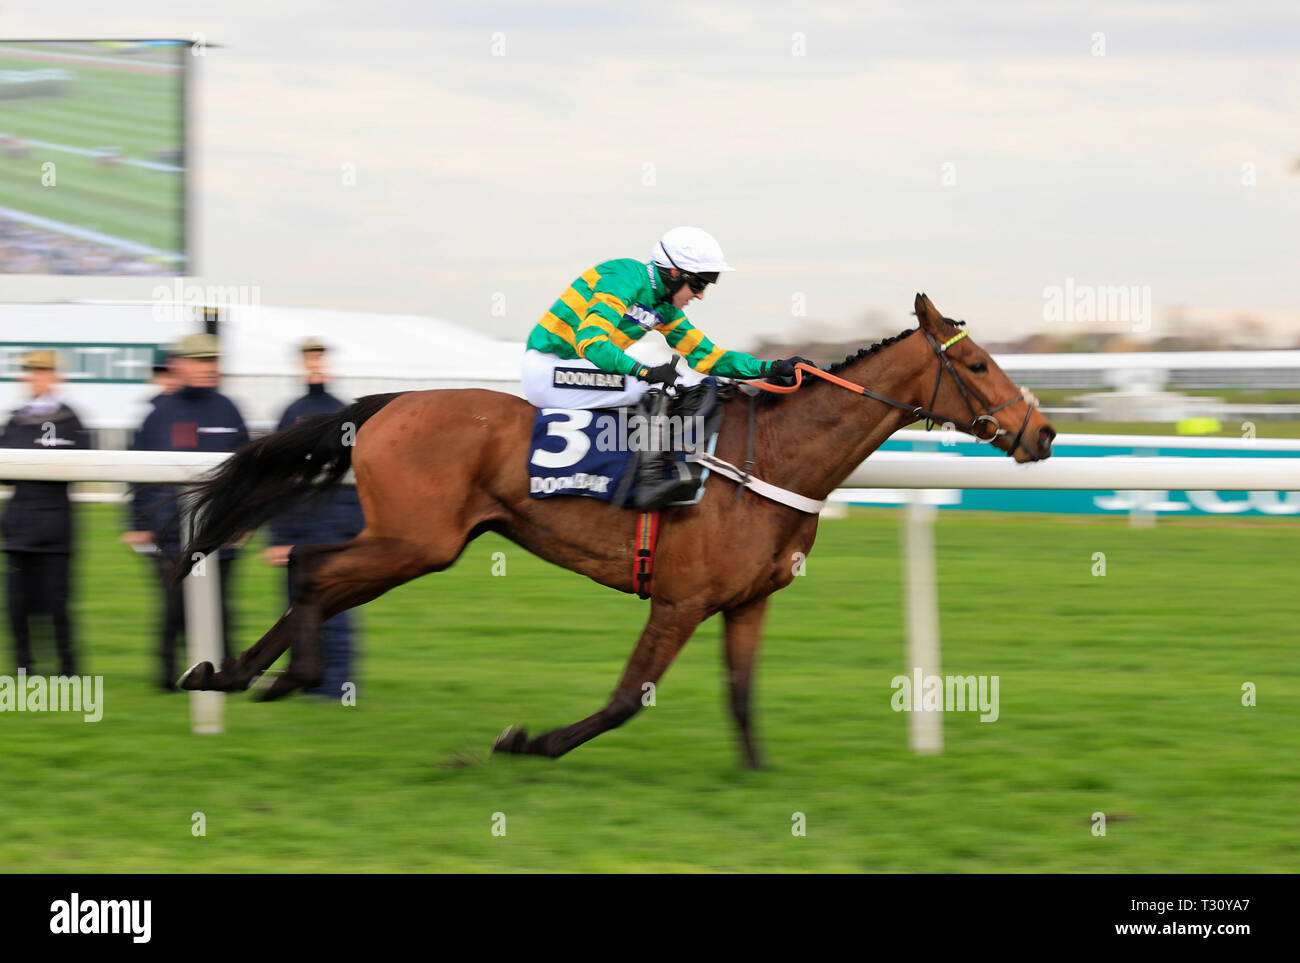 Aintree Racecourse, Aintree, UK. 5th Apr, 2019. The 2019 Grand National horse racing festival, day 2; Champ ridden by Barry Geraghty runs in to win The Doom Bar Sefton Novices Hurdle Credit: Action Plus Sports/Alamy Live News Stock Photo